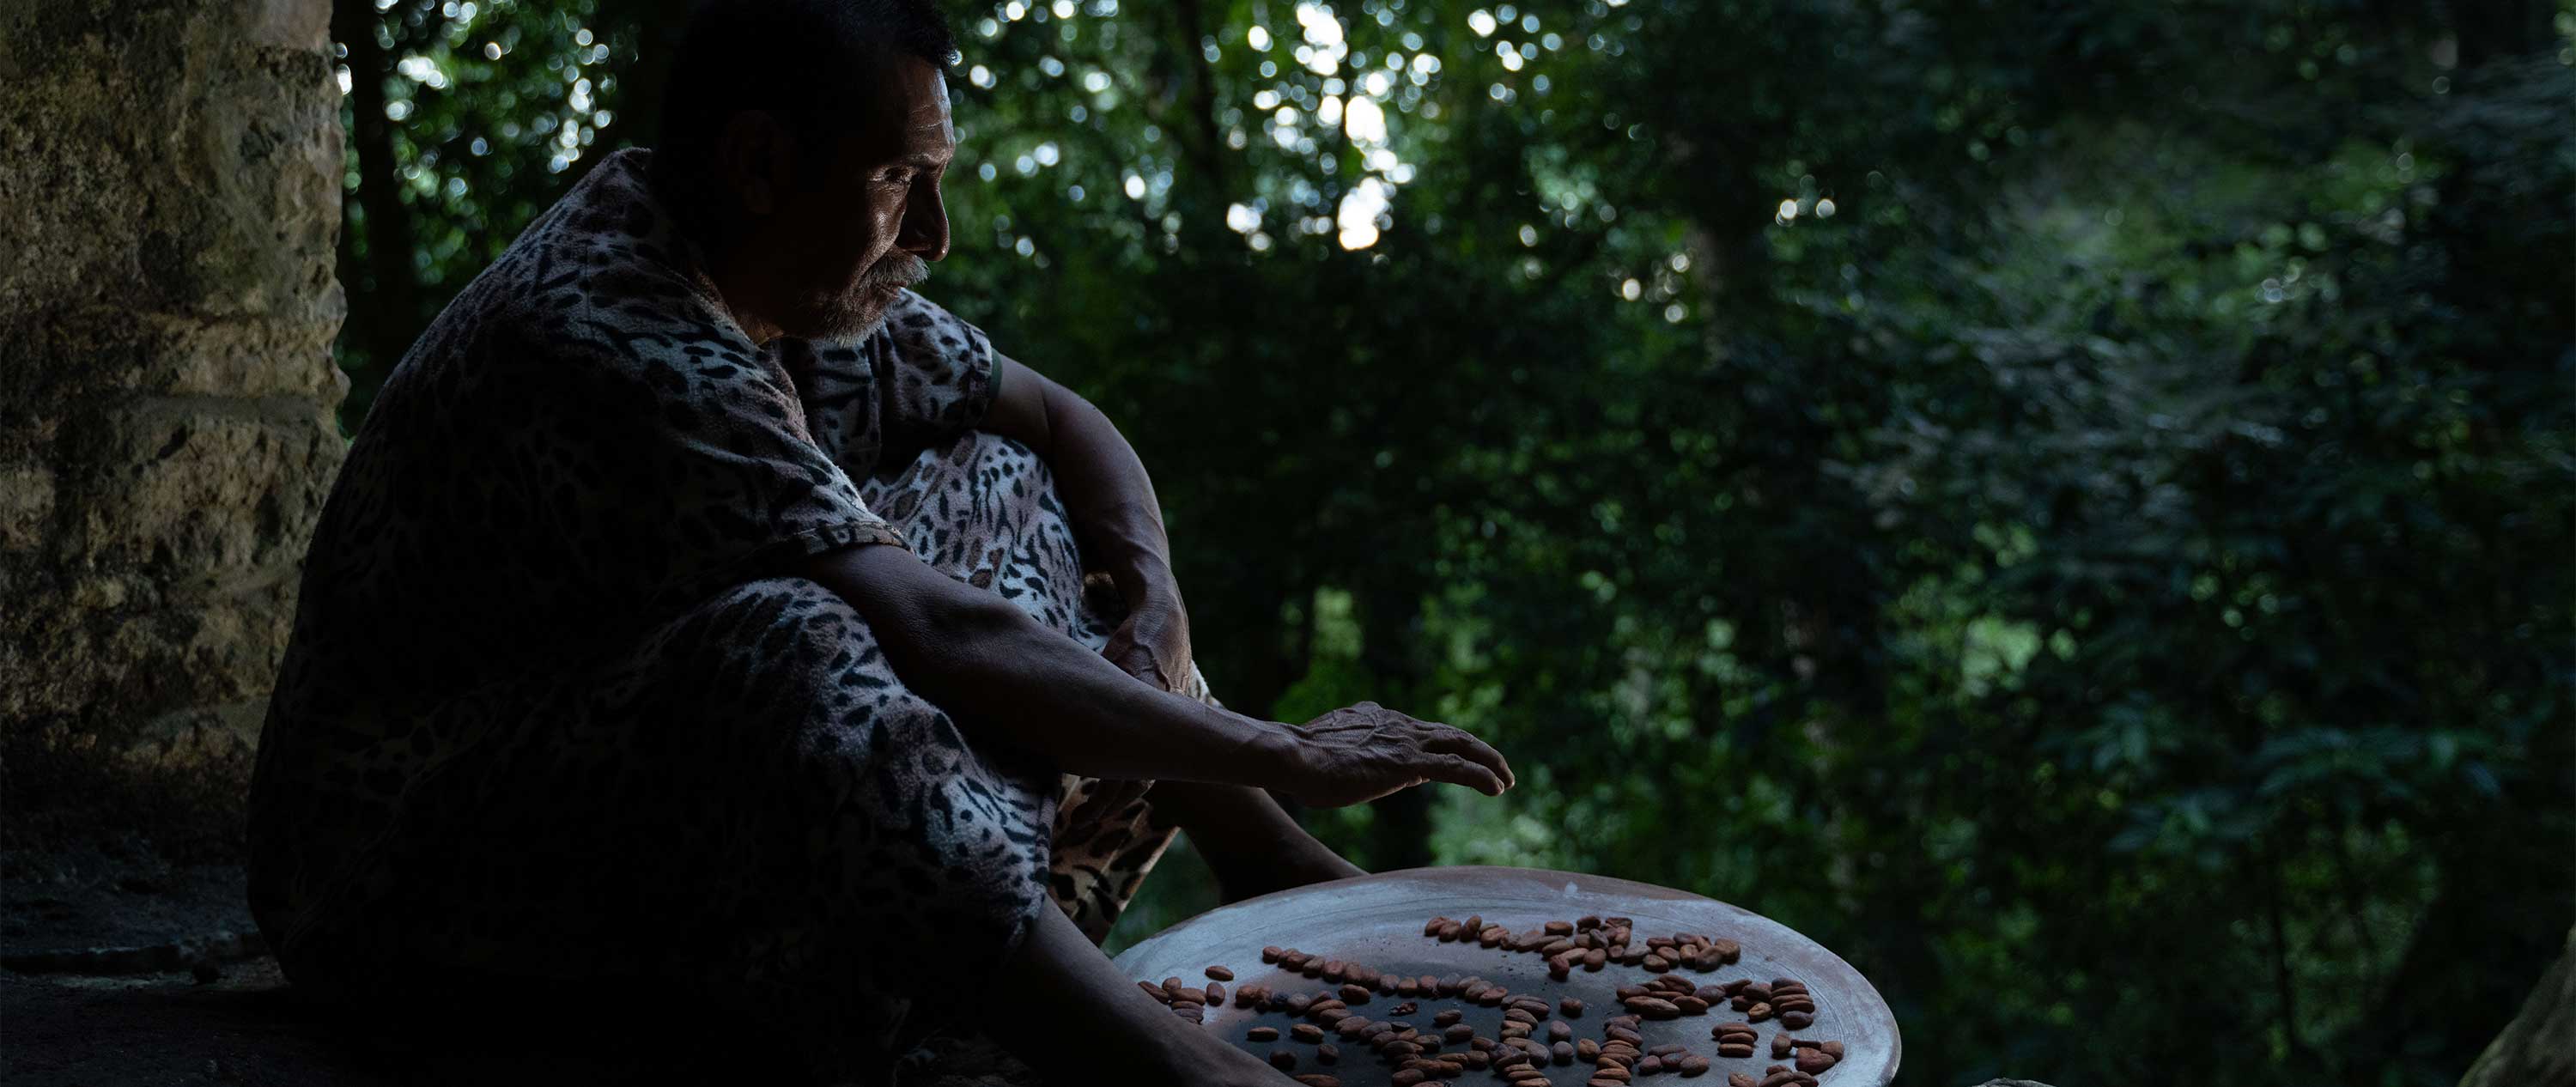 KA'KAO. An exhibition to discover the roots of cocoa